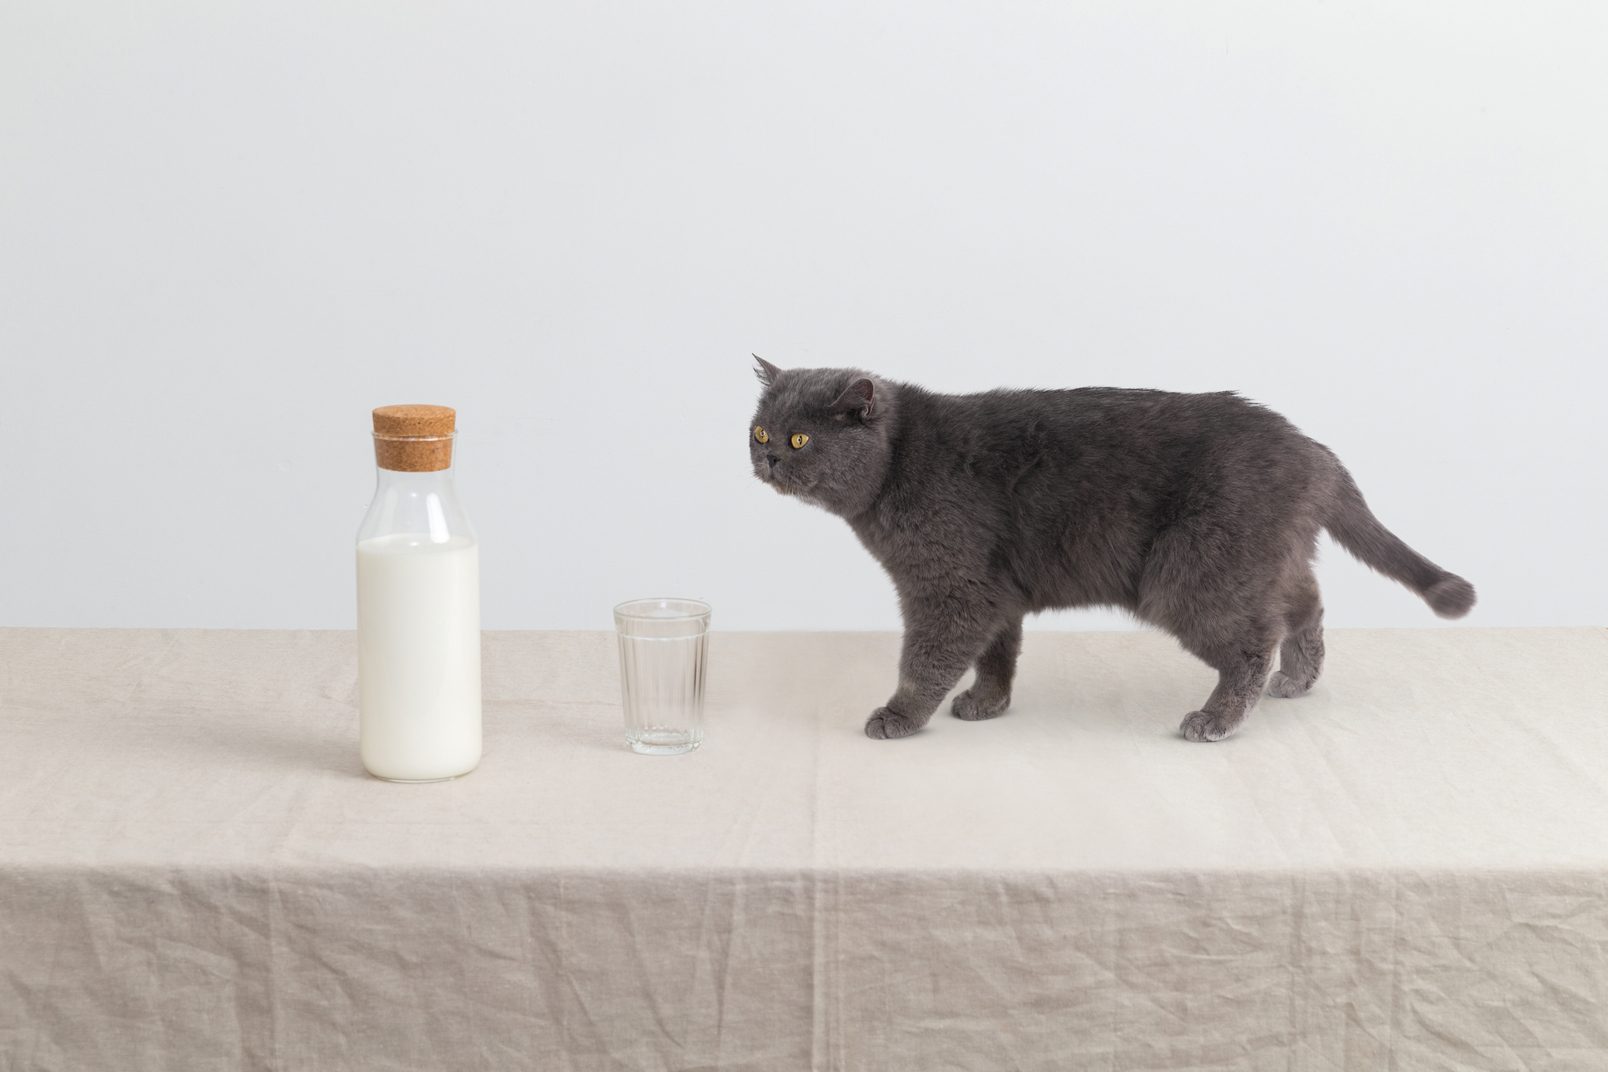 World milk day 2021: there is a bottle of milk and an empty glass on the table. There is a Persian cat on the table and looks at milk